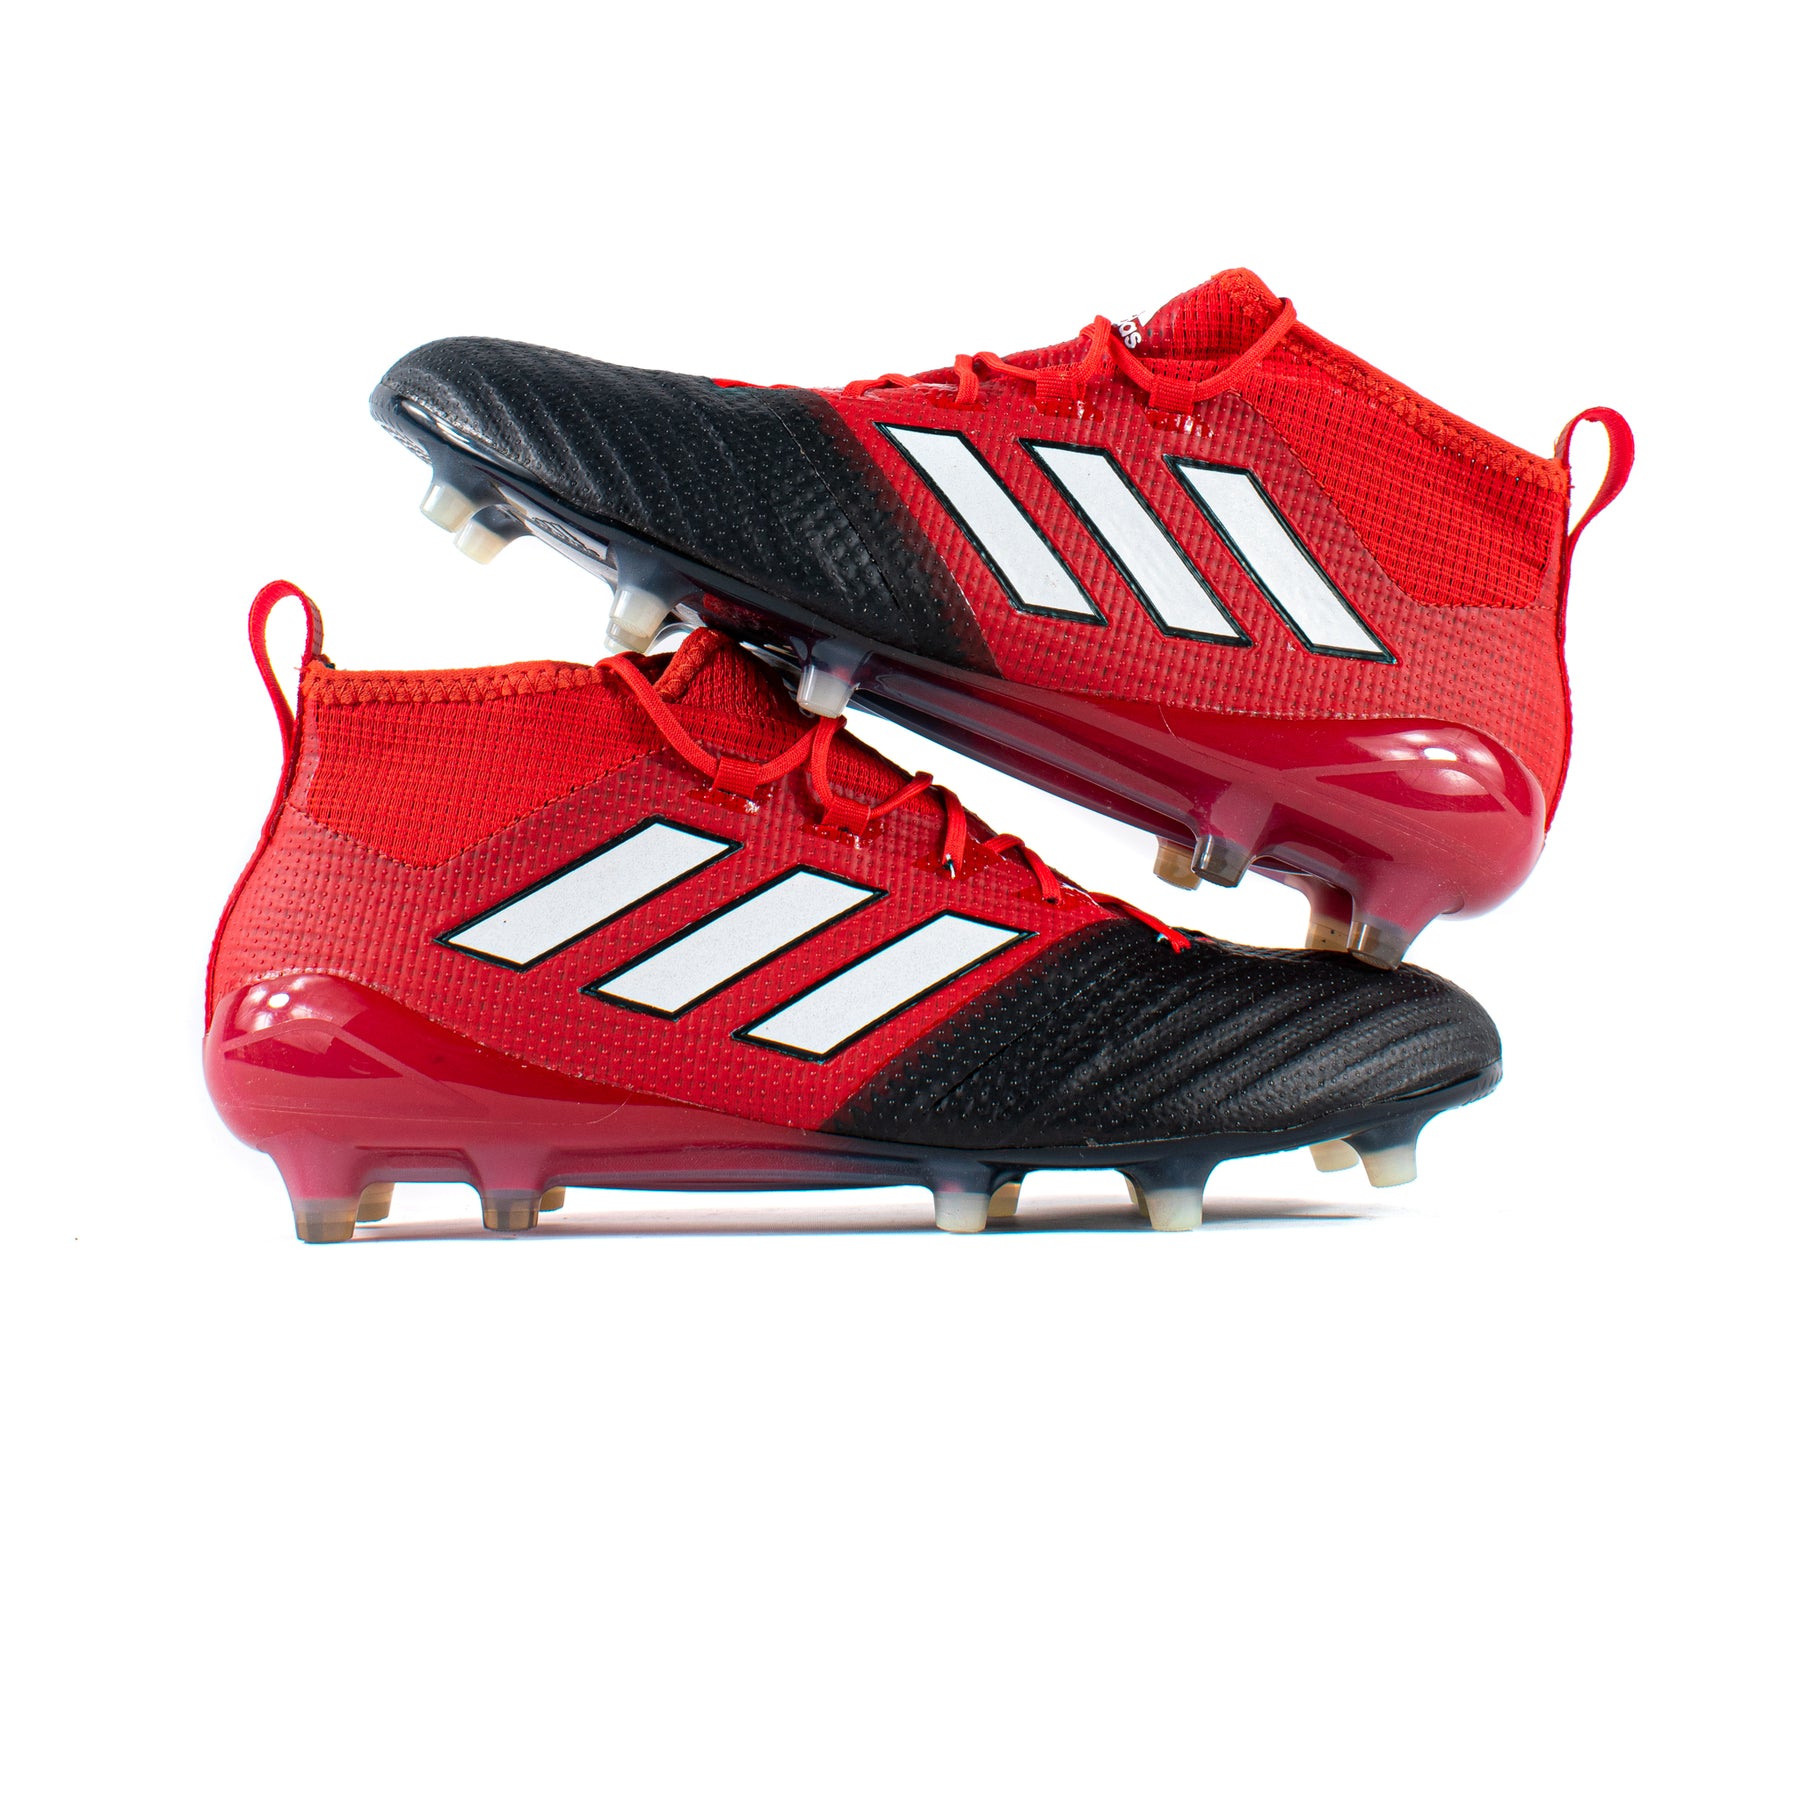 Adidas 17.1 Black Red FG Classic Cleats